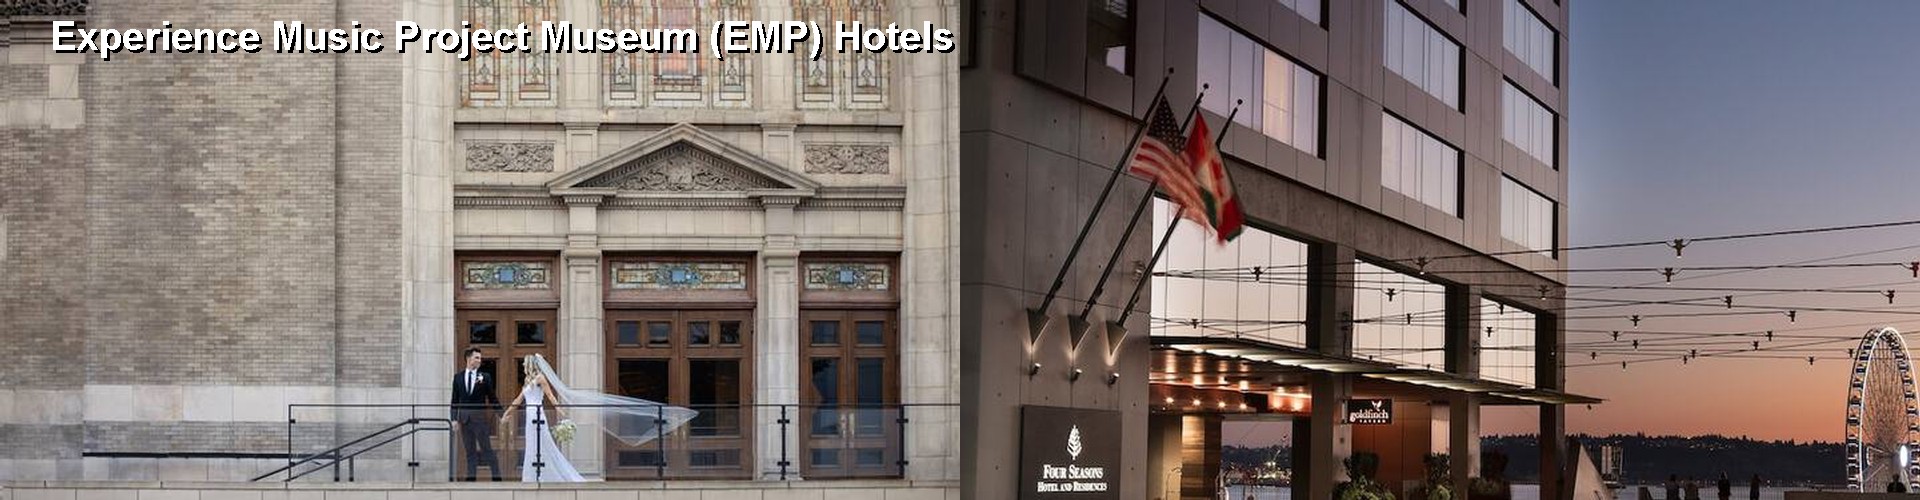 5 Best Hotels near Experience Music Project Museum (EMP)